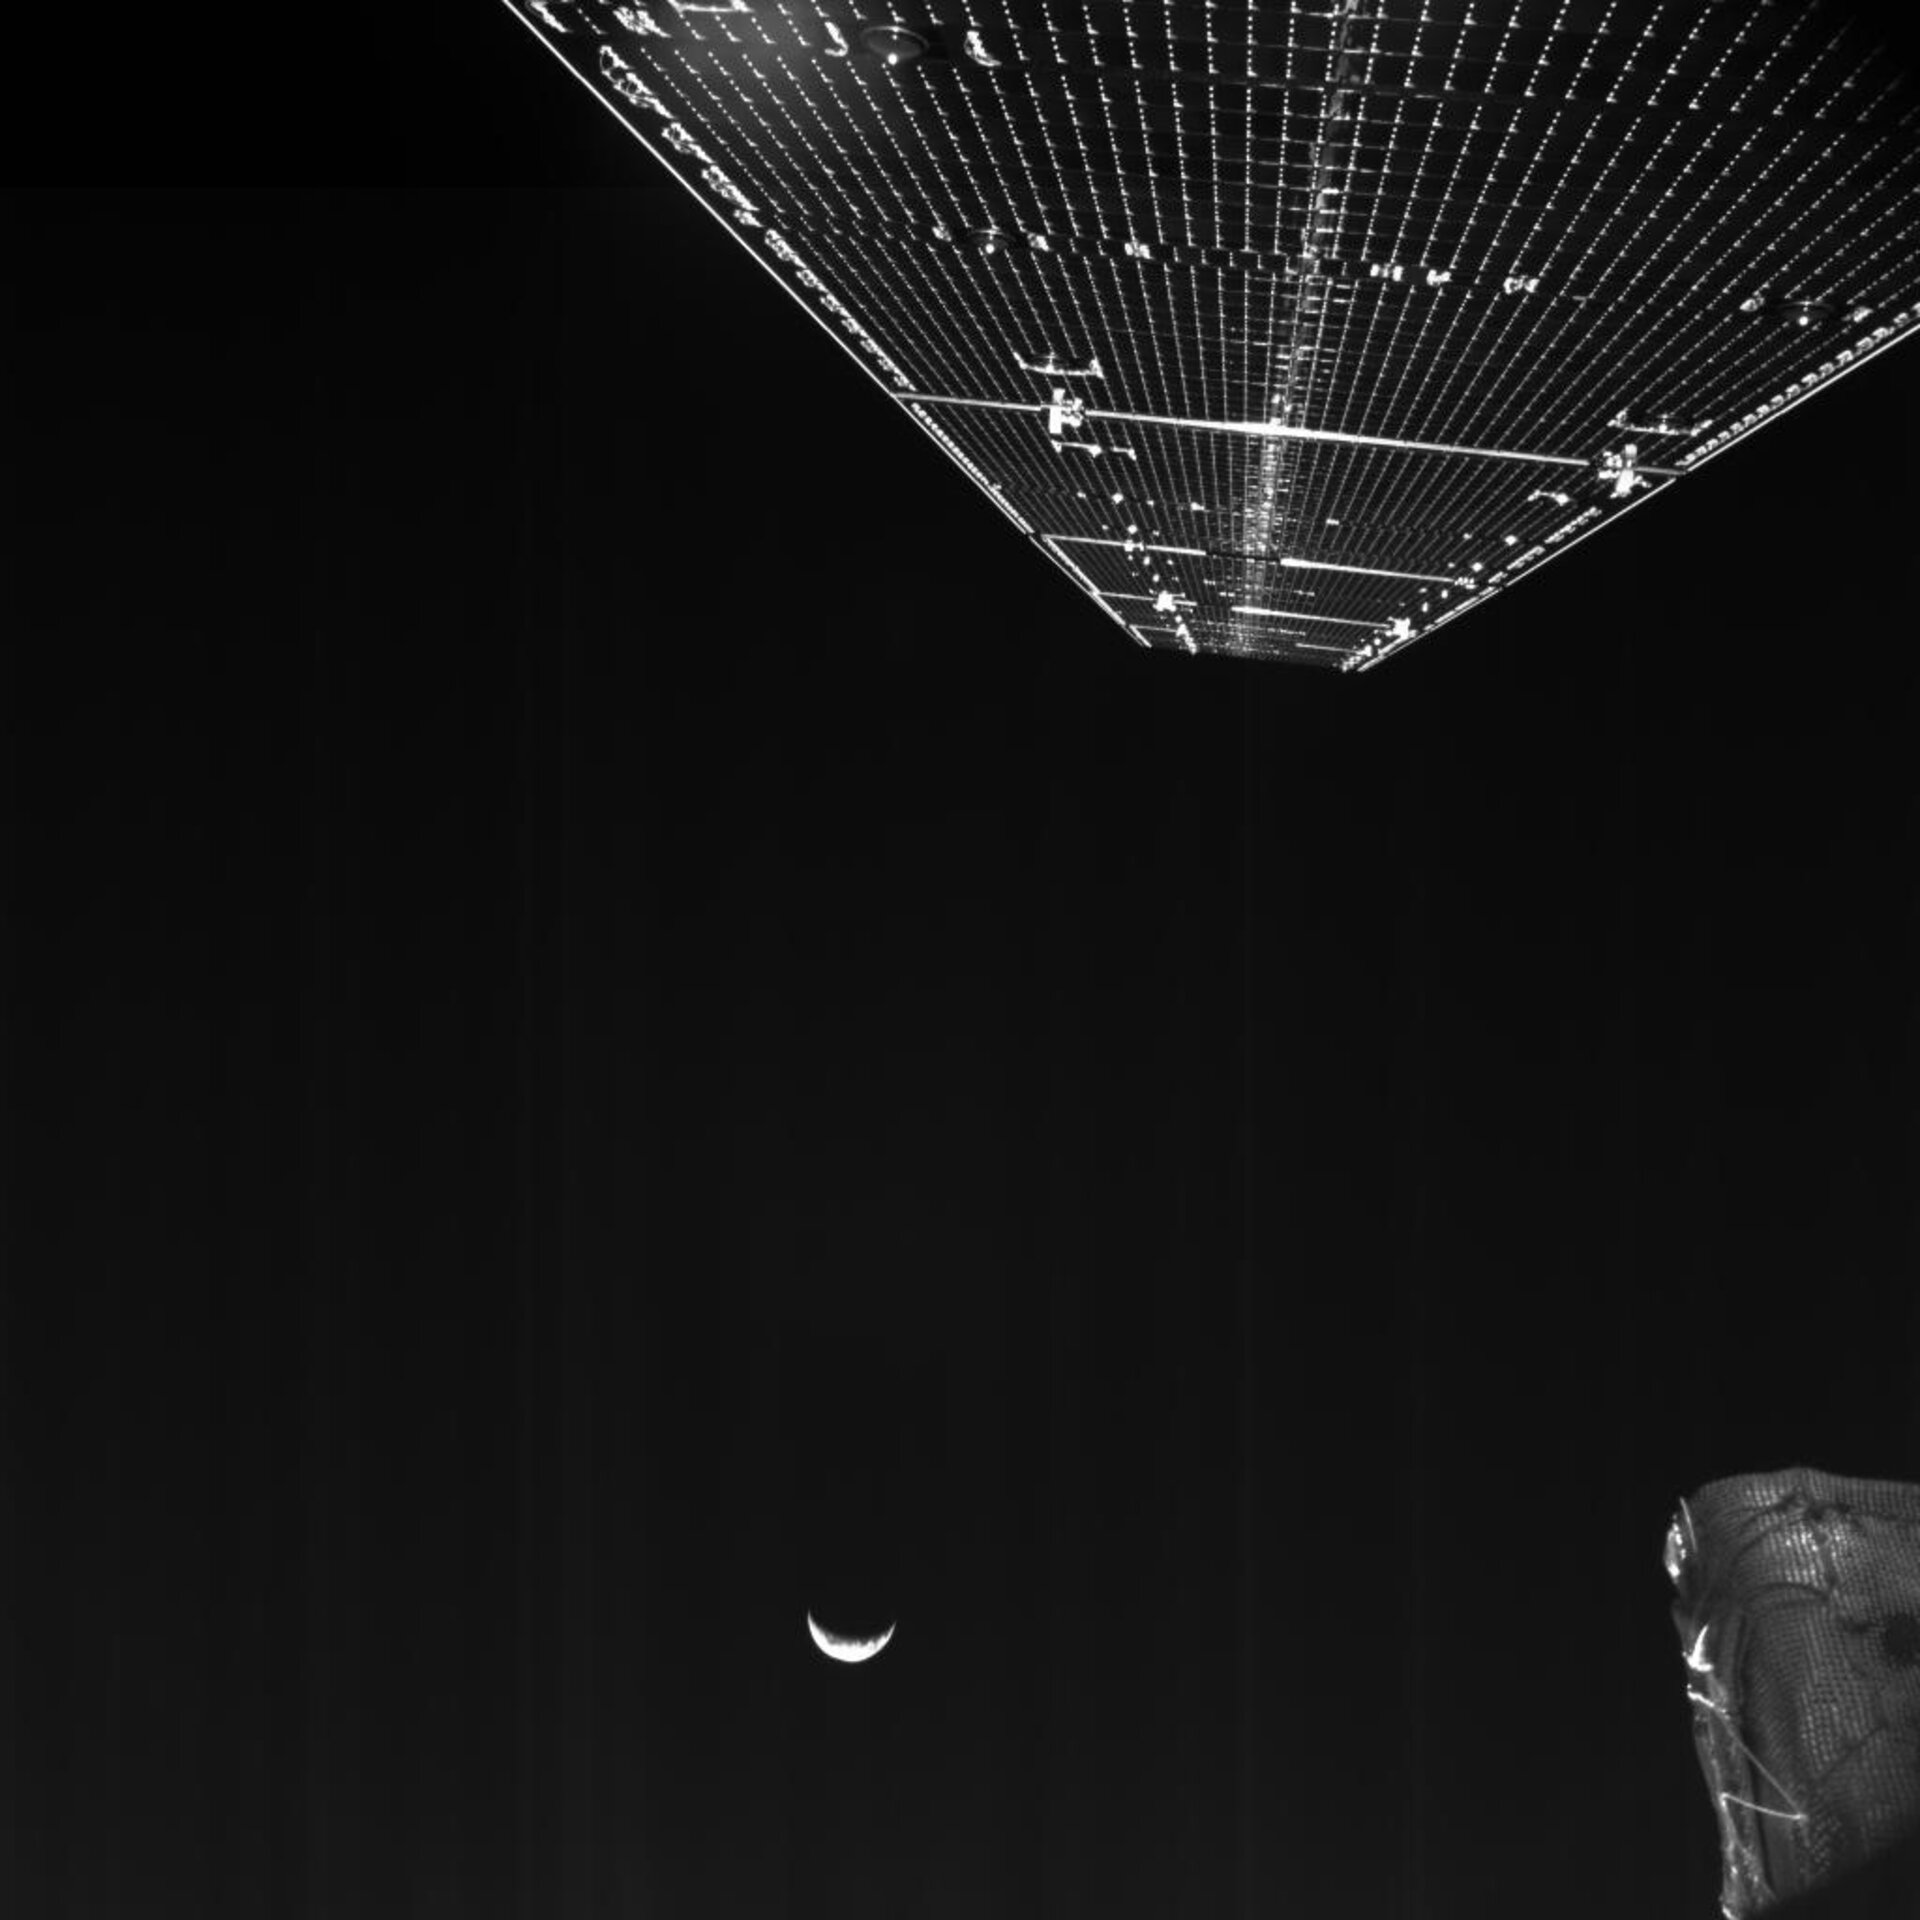 BepiColombo’s final glimpses of Earth after flyby